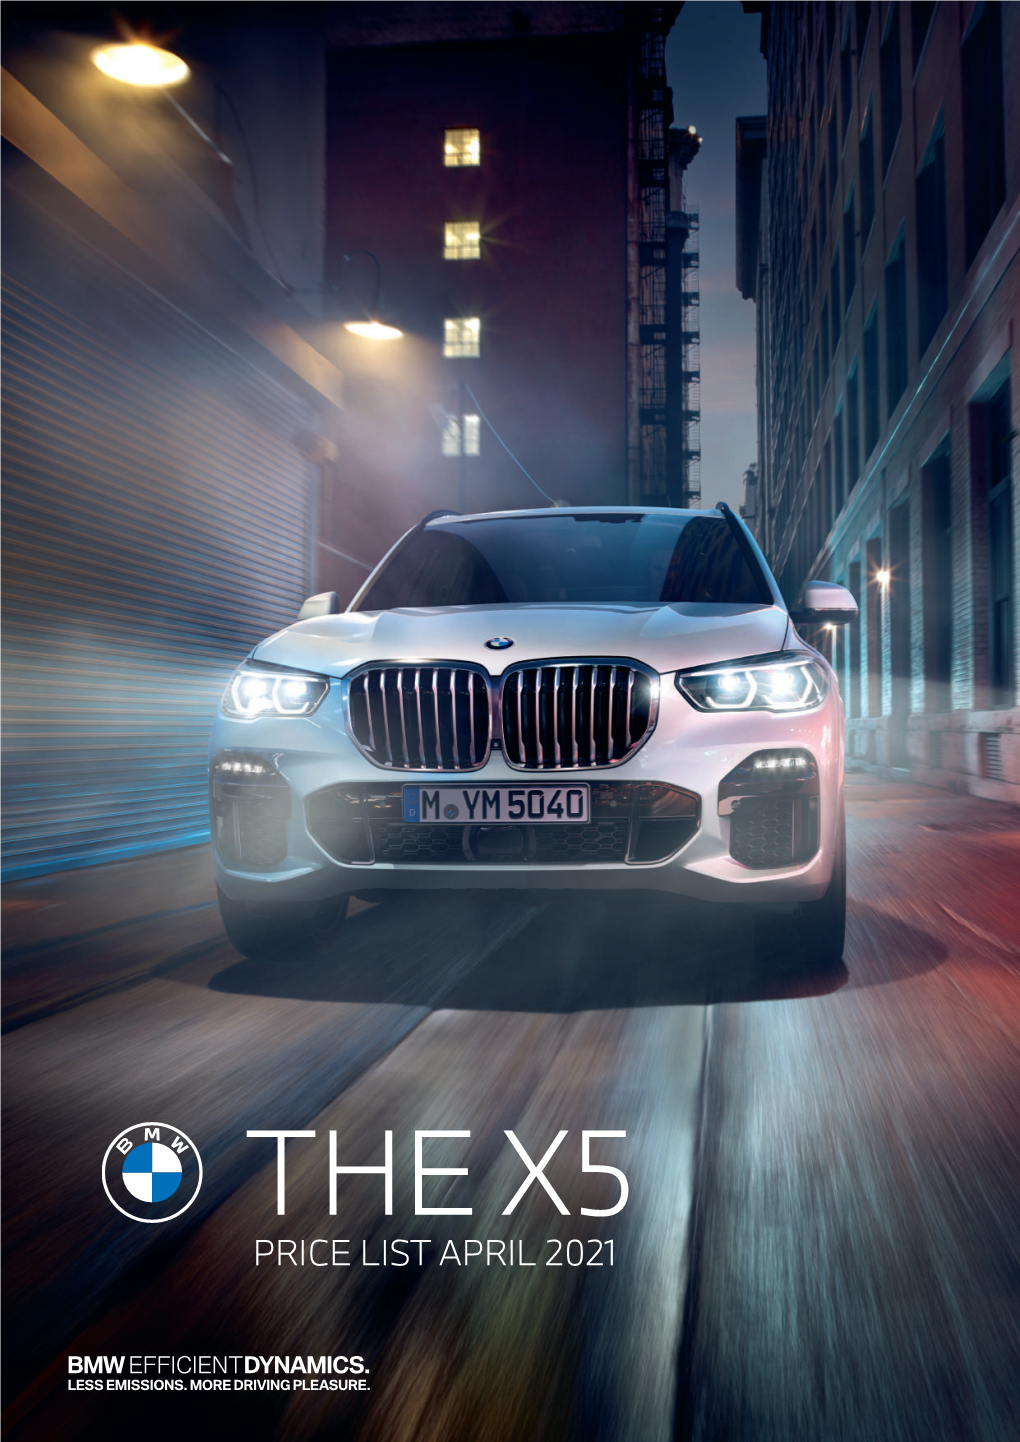 The All-New Bmw X5